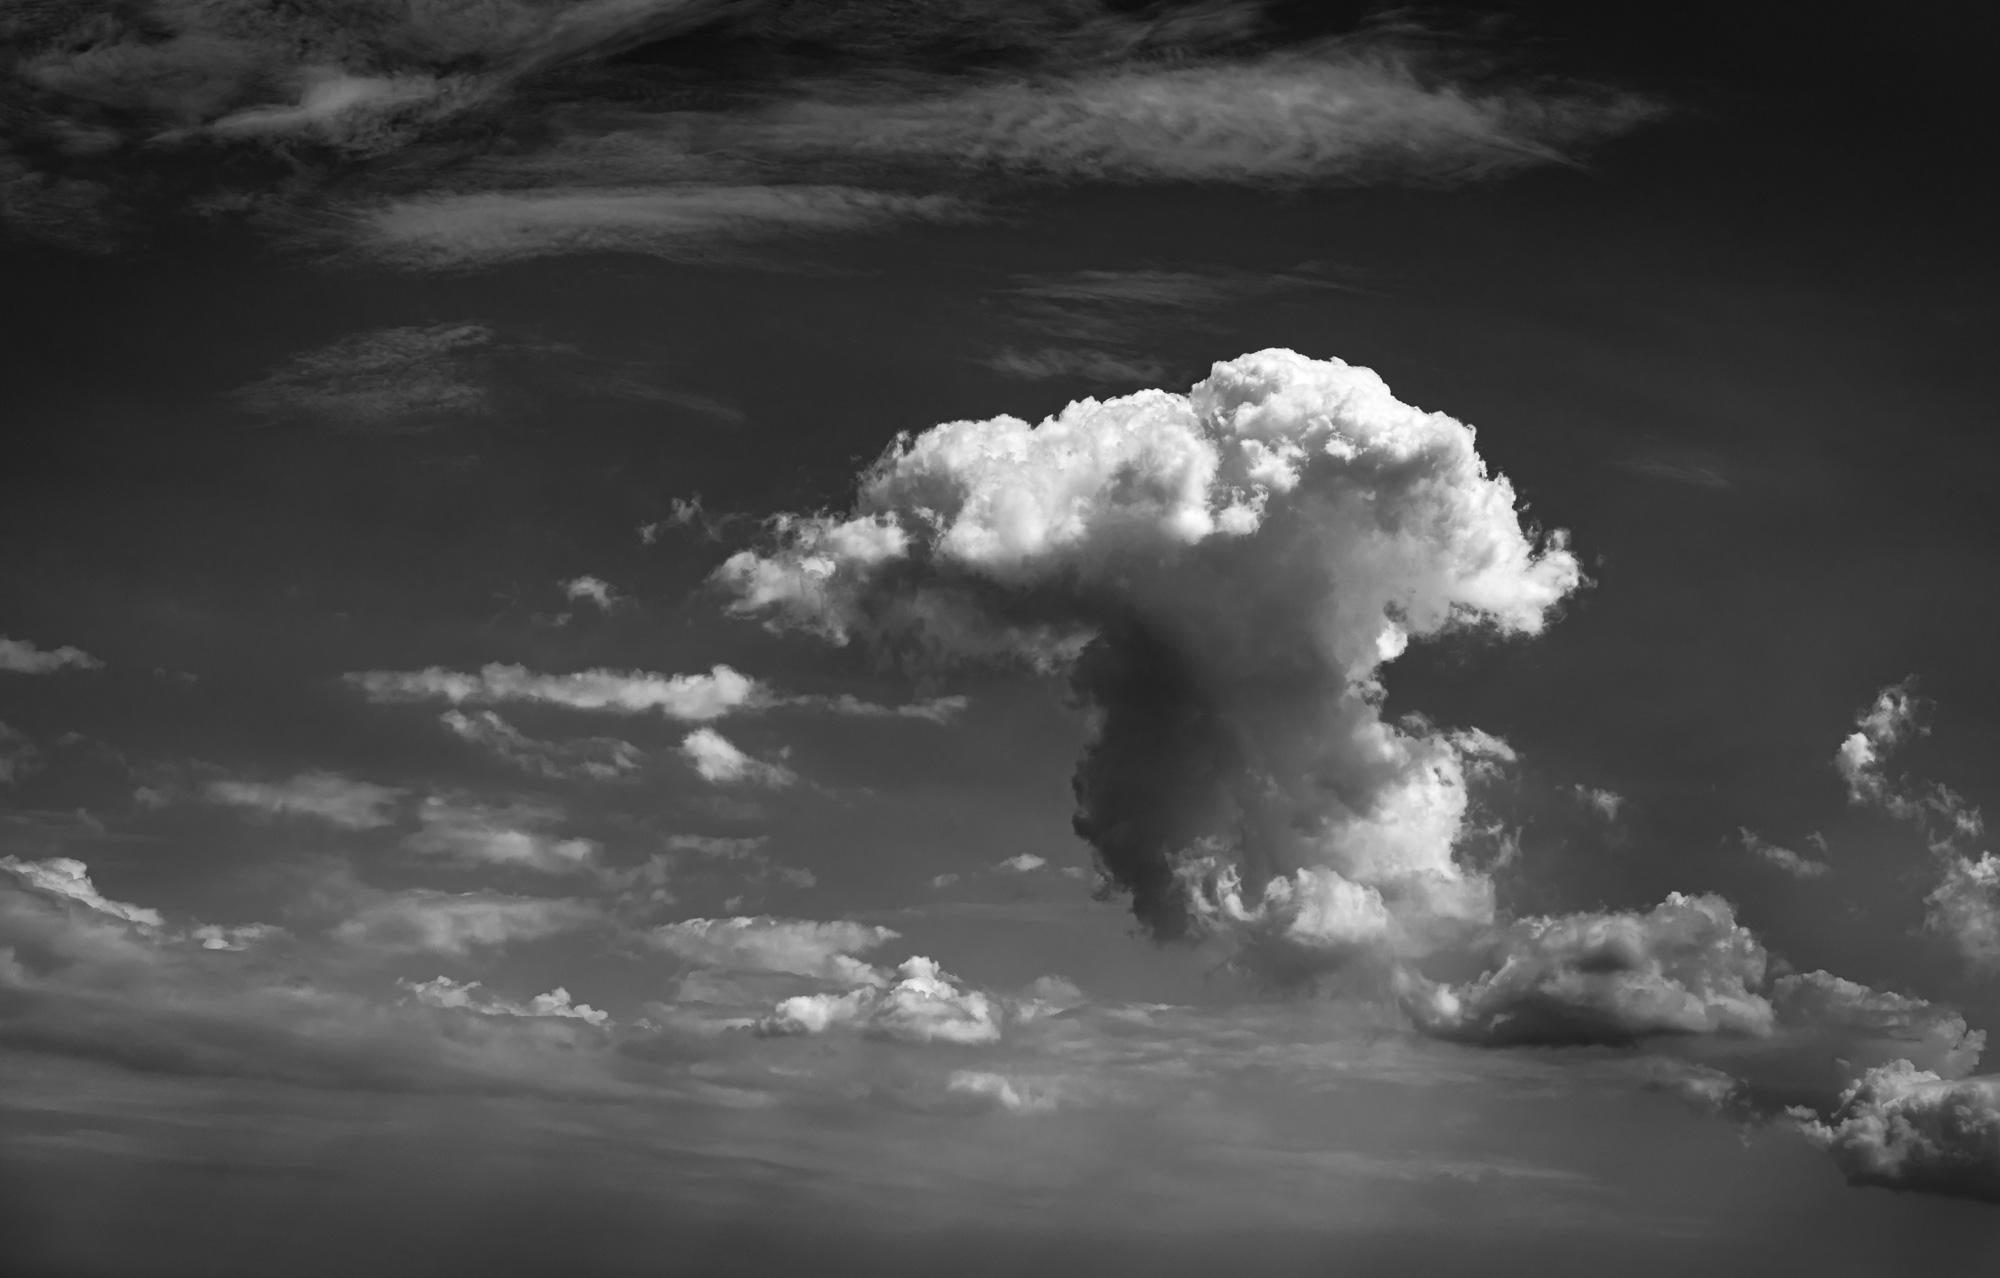 Howard Lewis Landscape Photograph - Limited Edition Black and White Photograph, Clouds, Sky - "Searching" 20 x 24